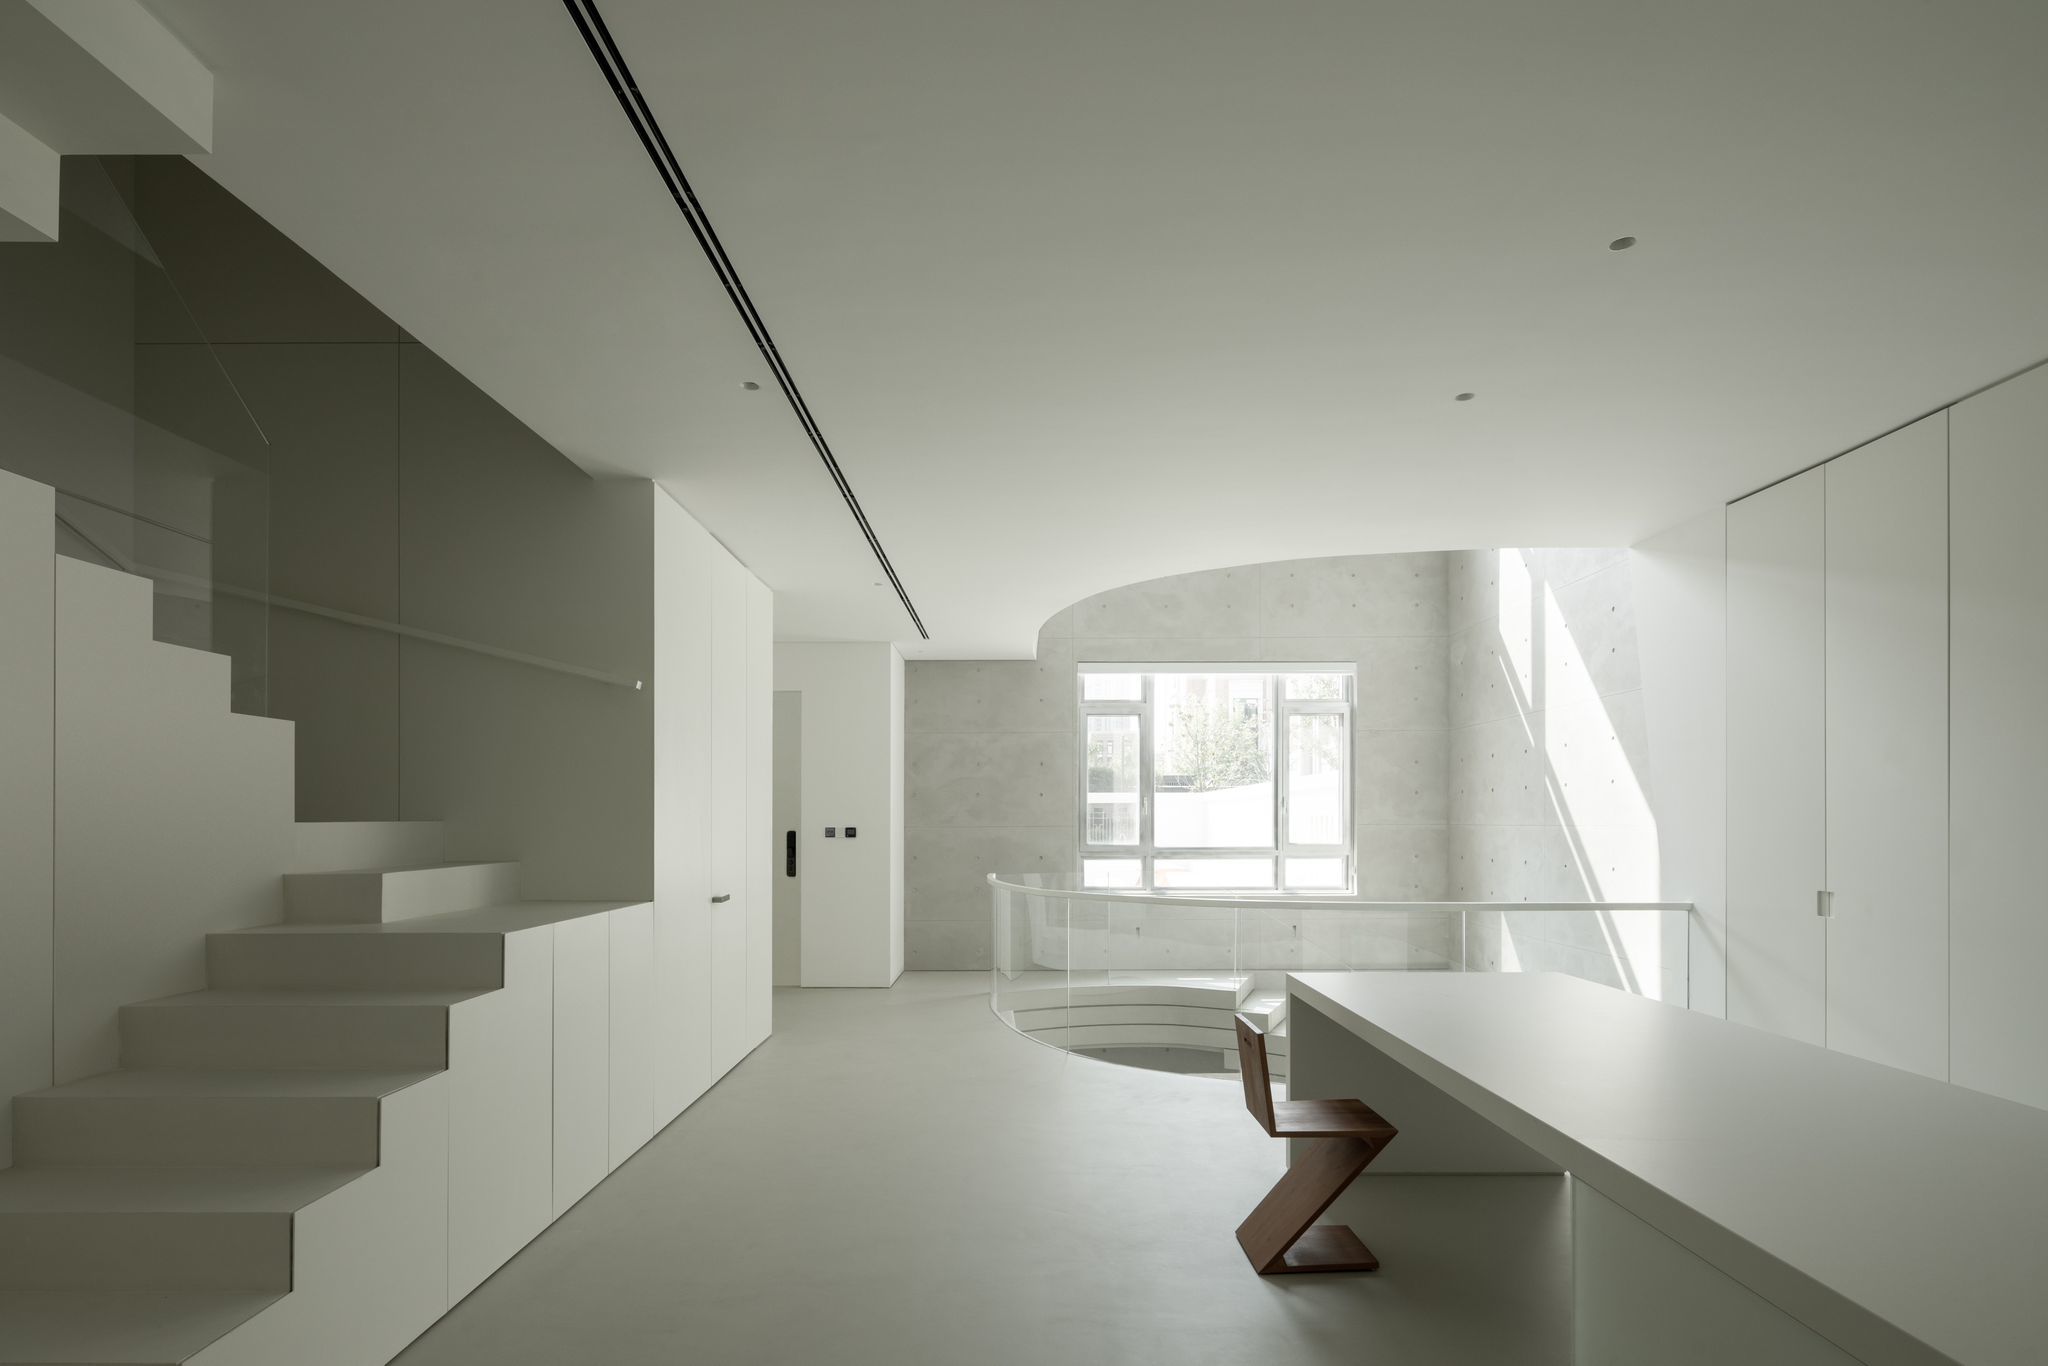 Ceiling, floor and walls of microcement in a house in Kiev in the Luz project.